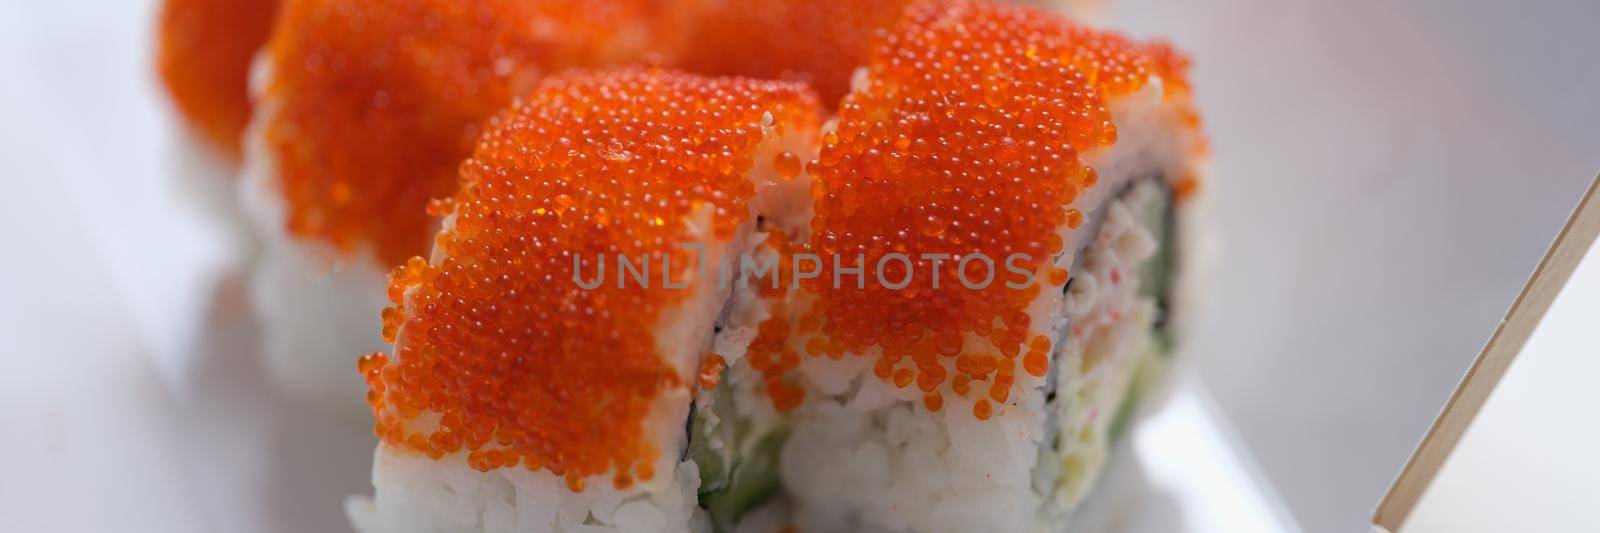 Roll California with cream cheese tobiko caviar. Fresh and tasty traditional Japanese sushi